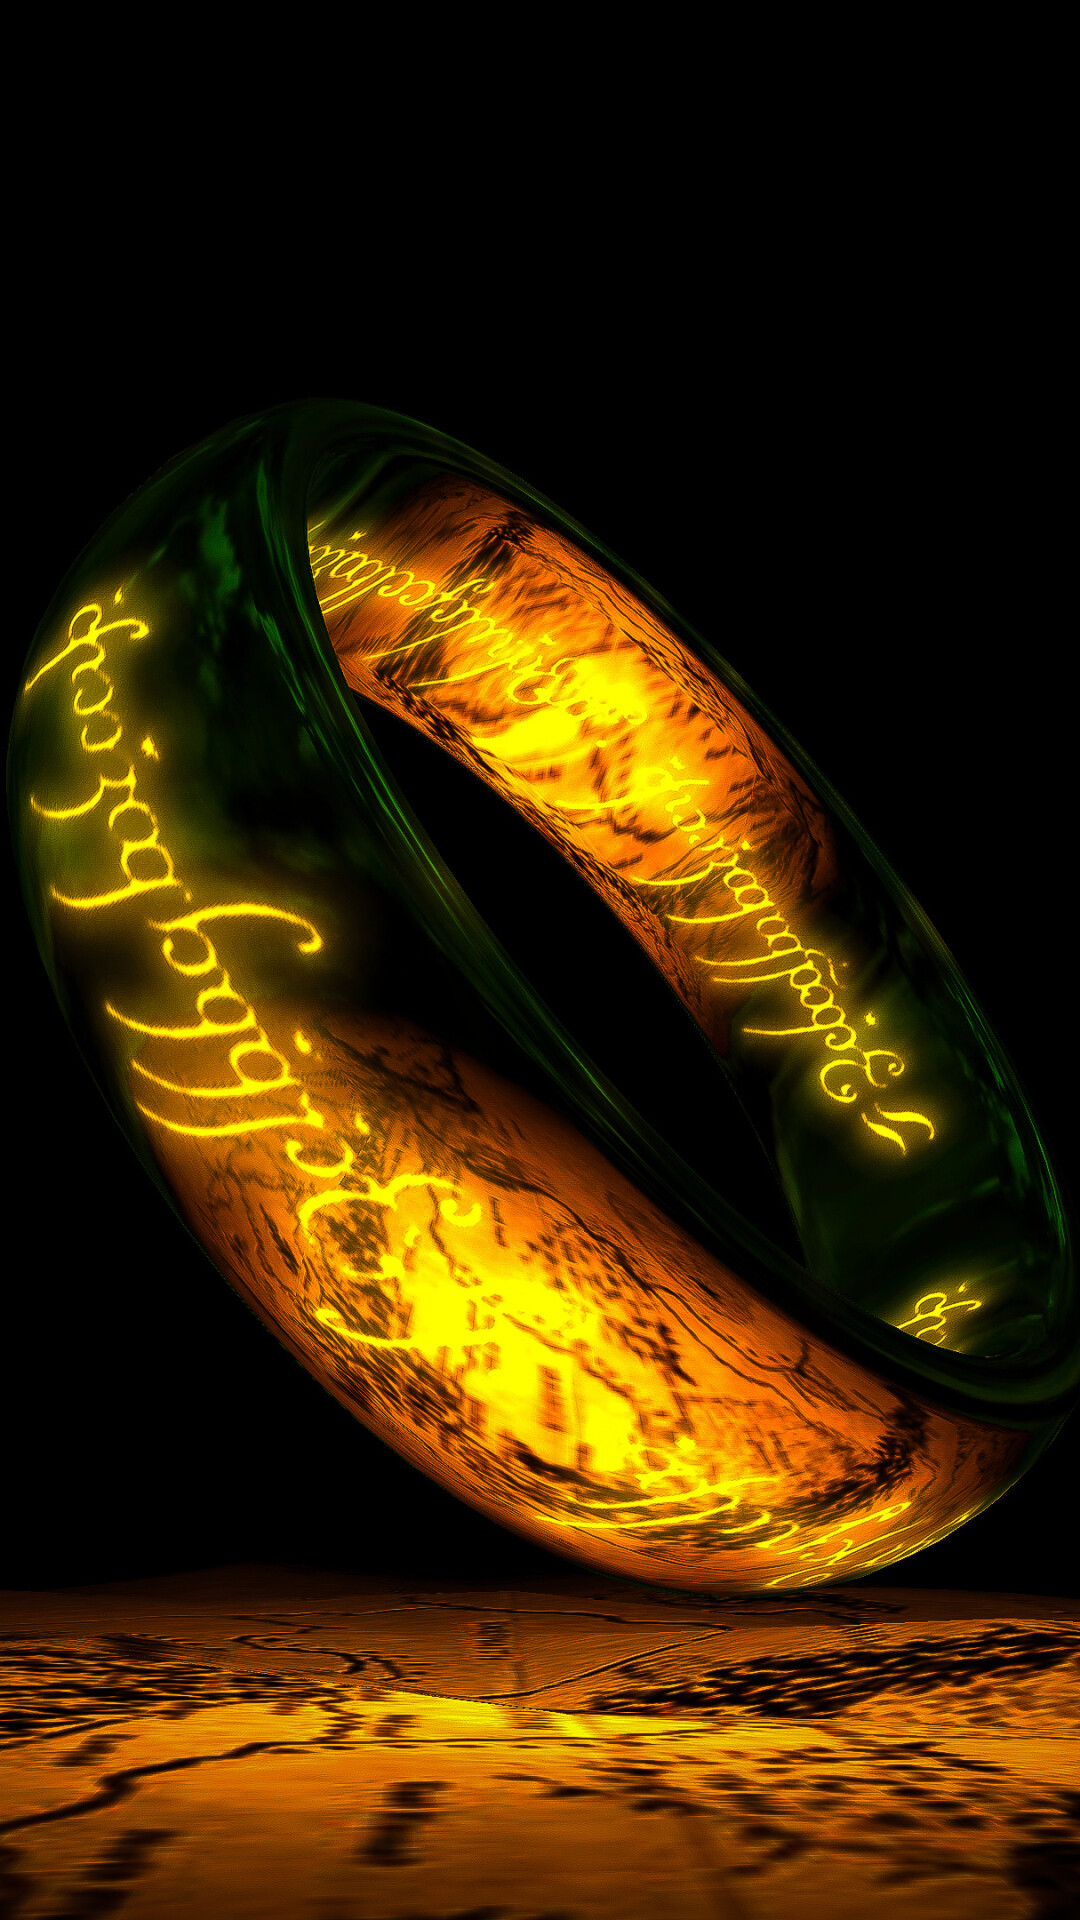 The Lord of the Rings: One Ring, Crafted by the Dark Lord Sauron in the fire of Orodruin. 1080x1920 Full HD Wallpaper.